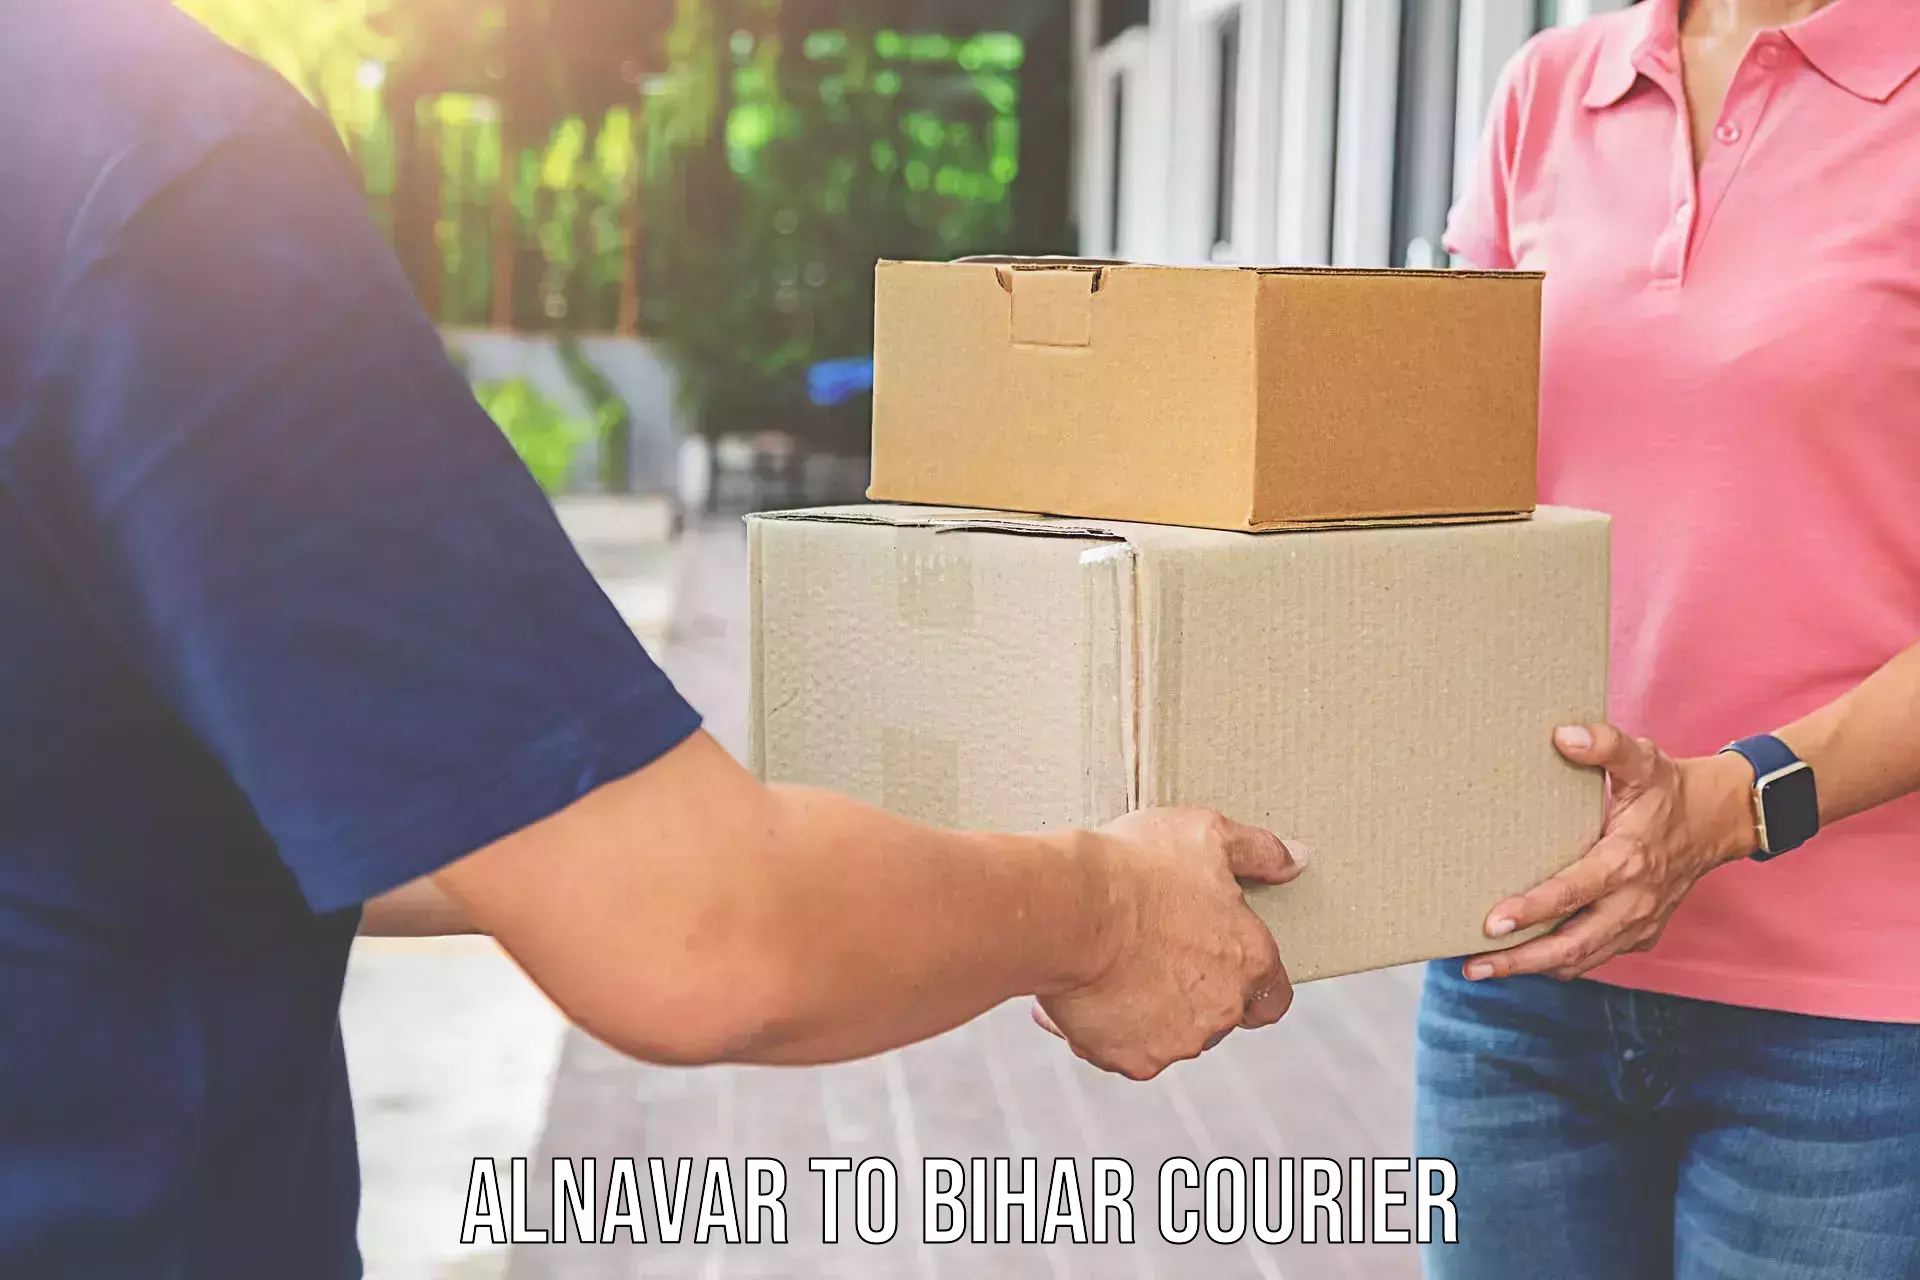 Professional packing services in Alnavar to Dhaka